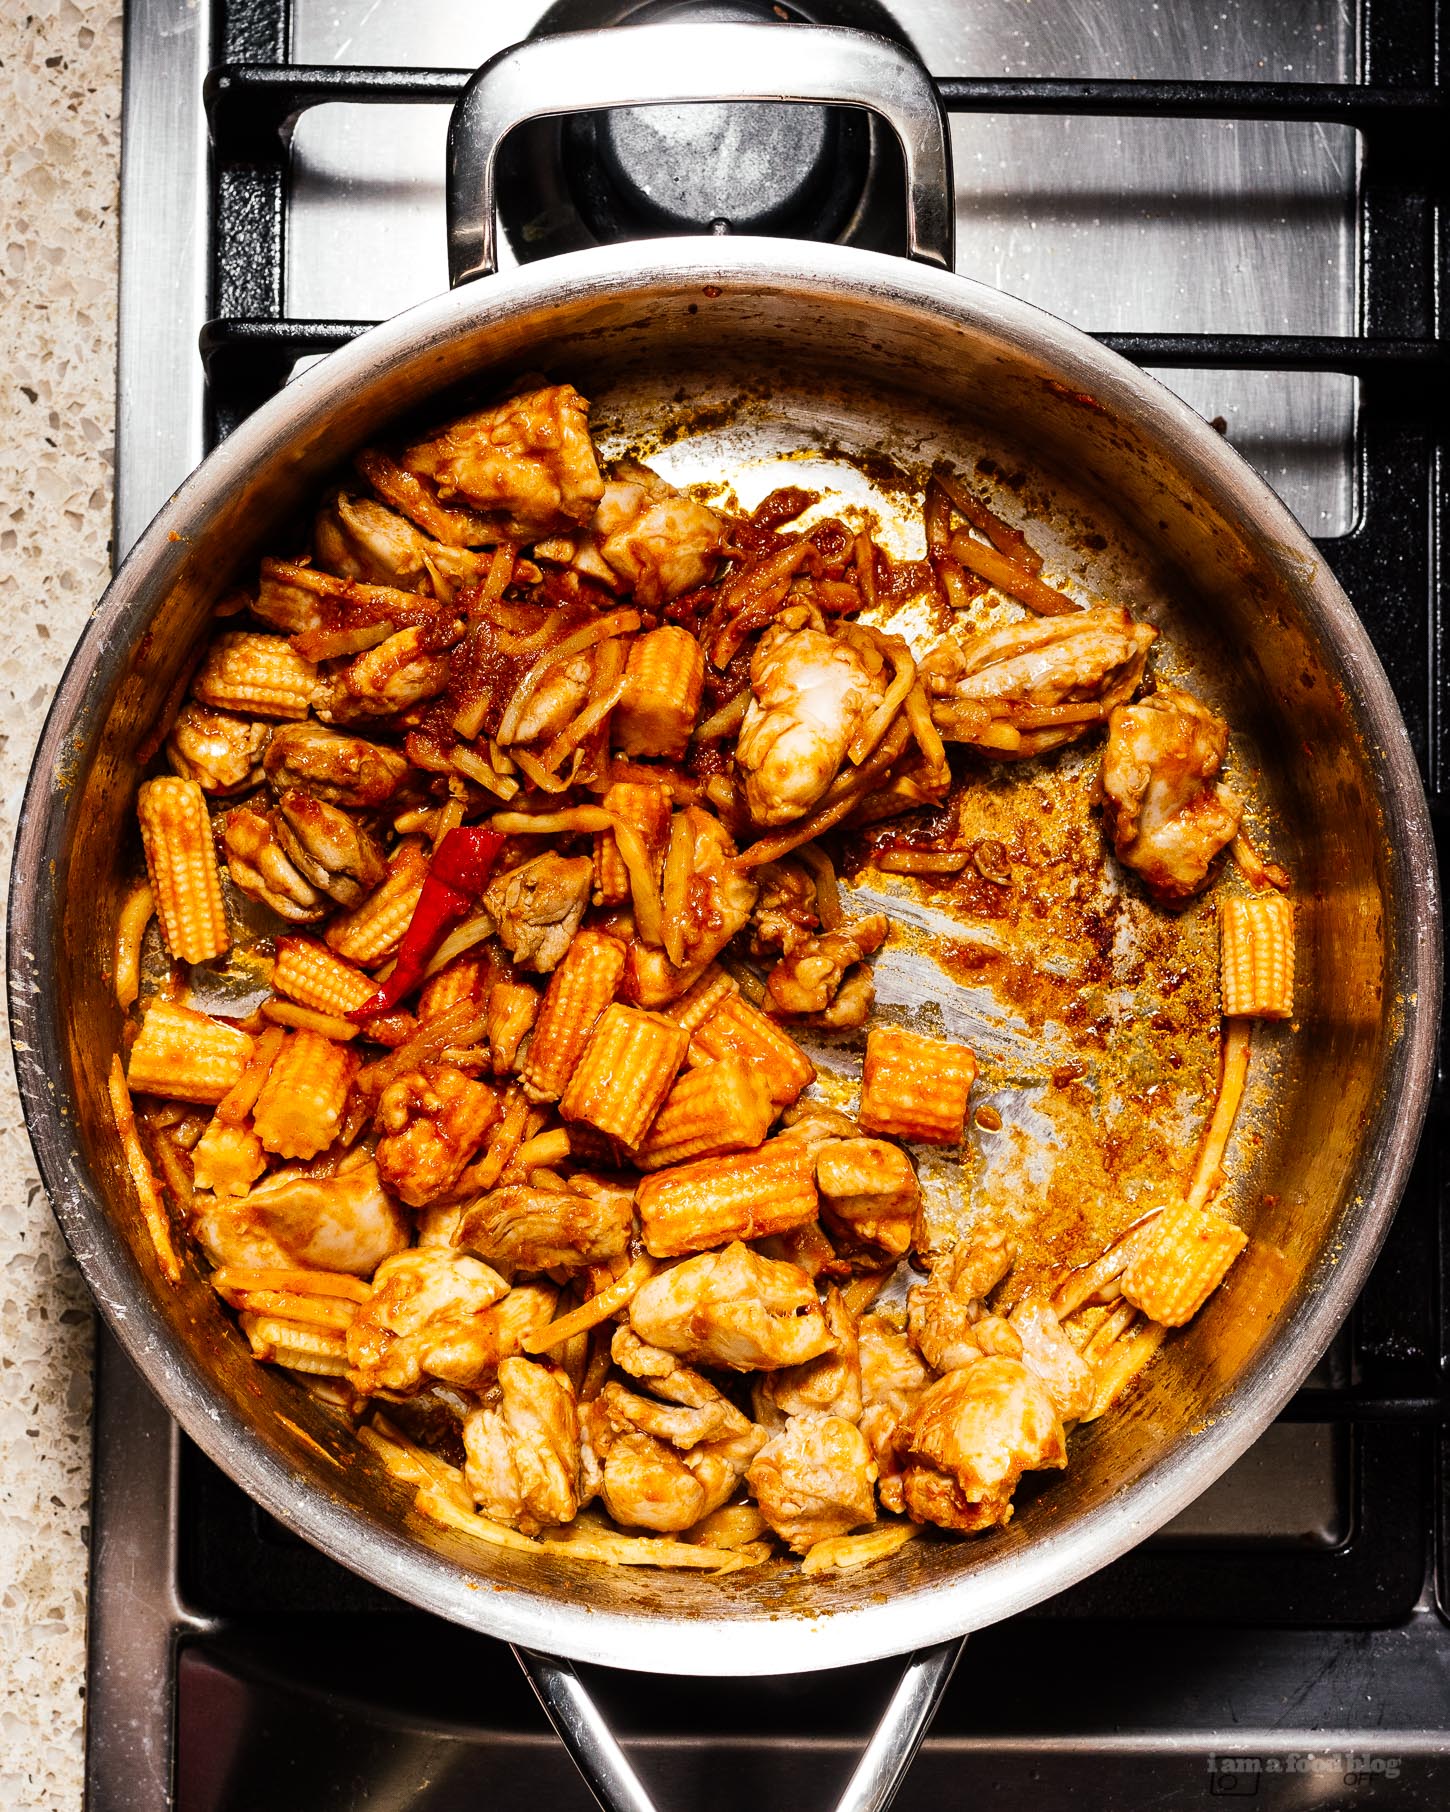 Thai Red Curry Chicken with Bamboo Shoots Recipe | www.iamafoodblog.com